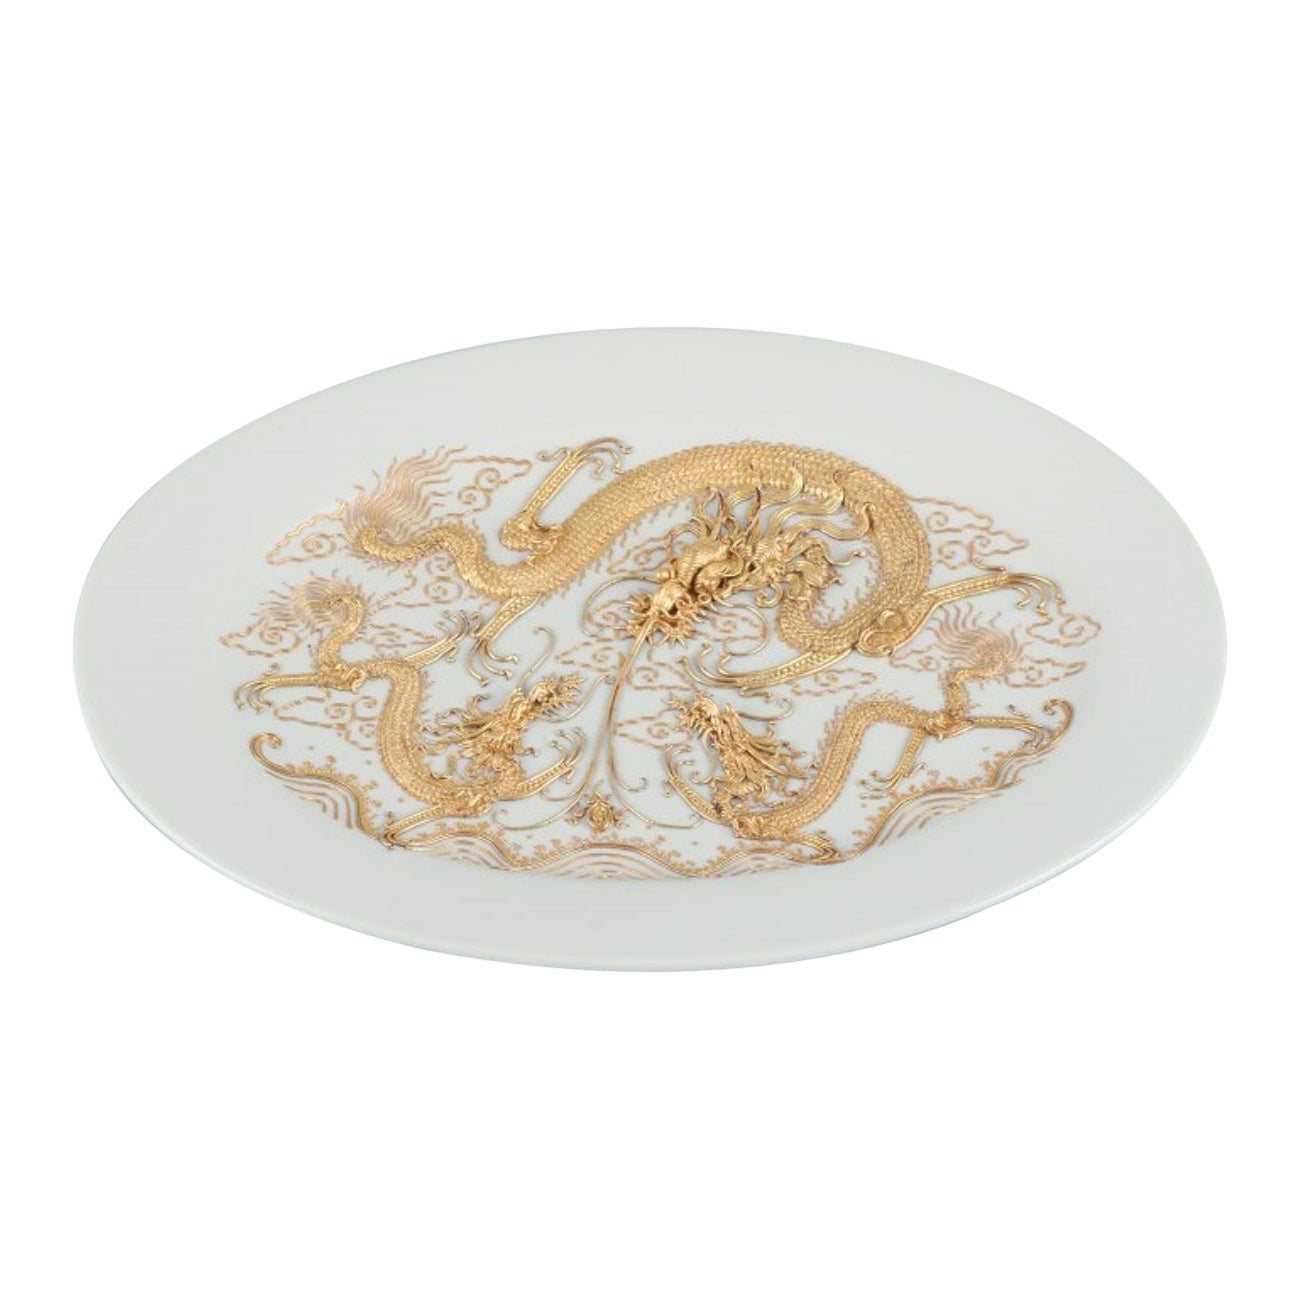 Large oval porcelain platter featuring dragons, in Versace style.